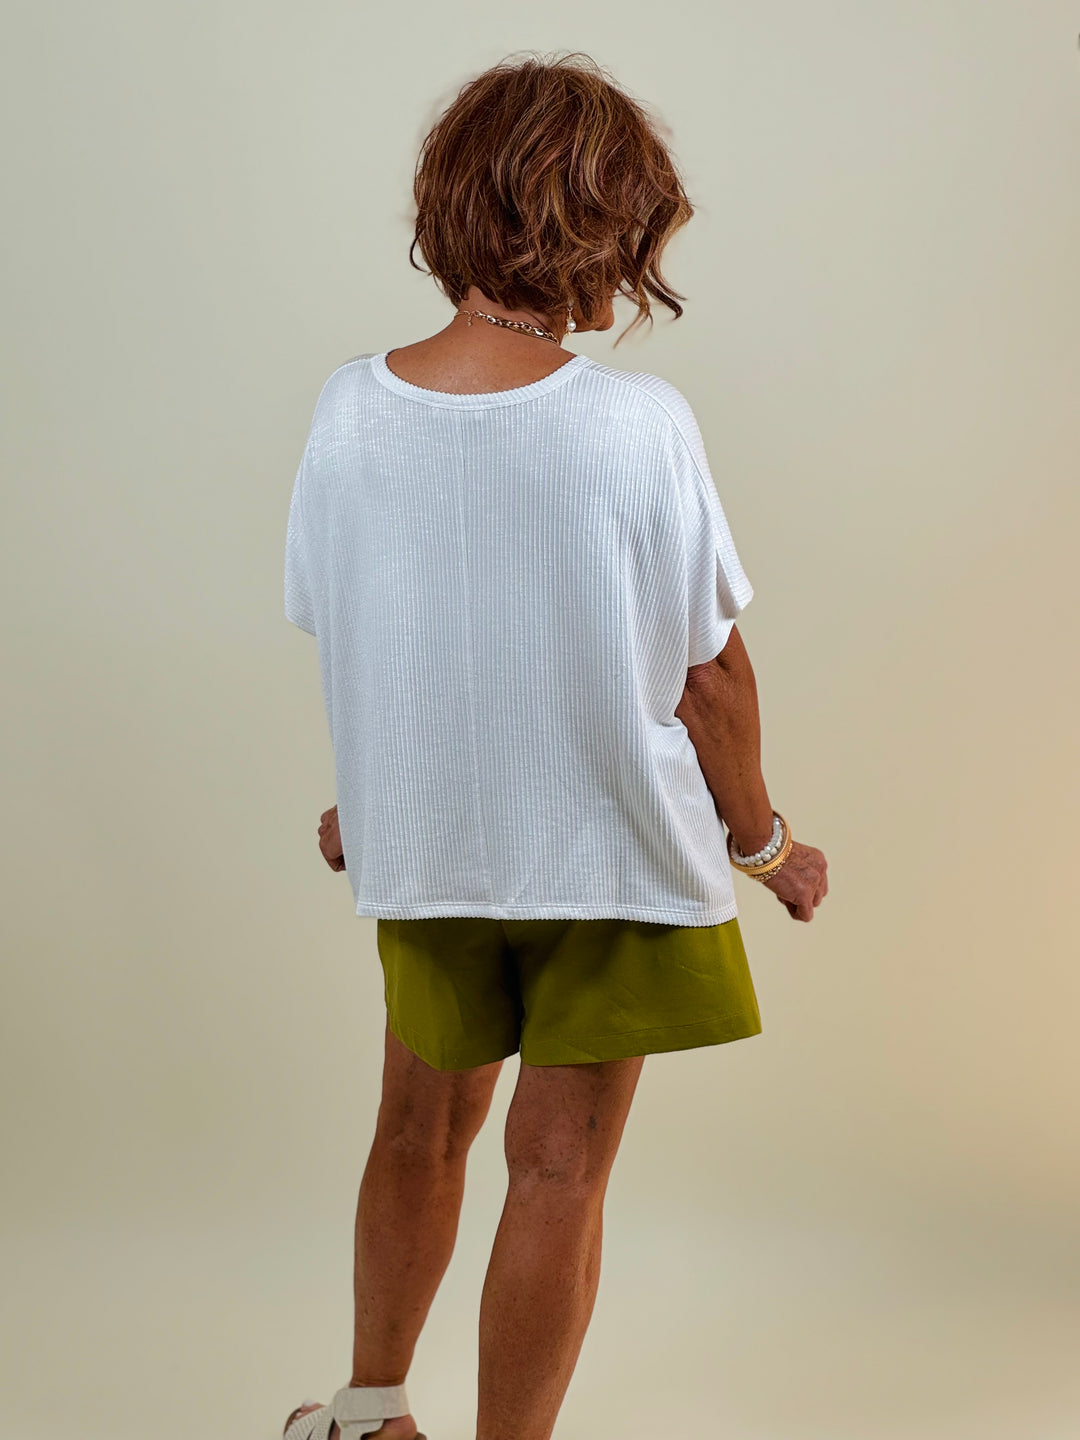 RESTOCKED: Breezy Palms Linen Shorts - 5 Color Options - Available Medium Through Extended Sizes